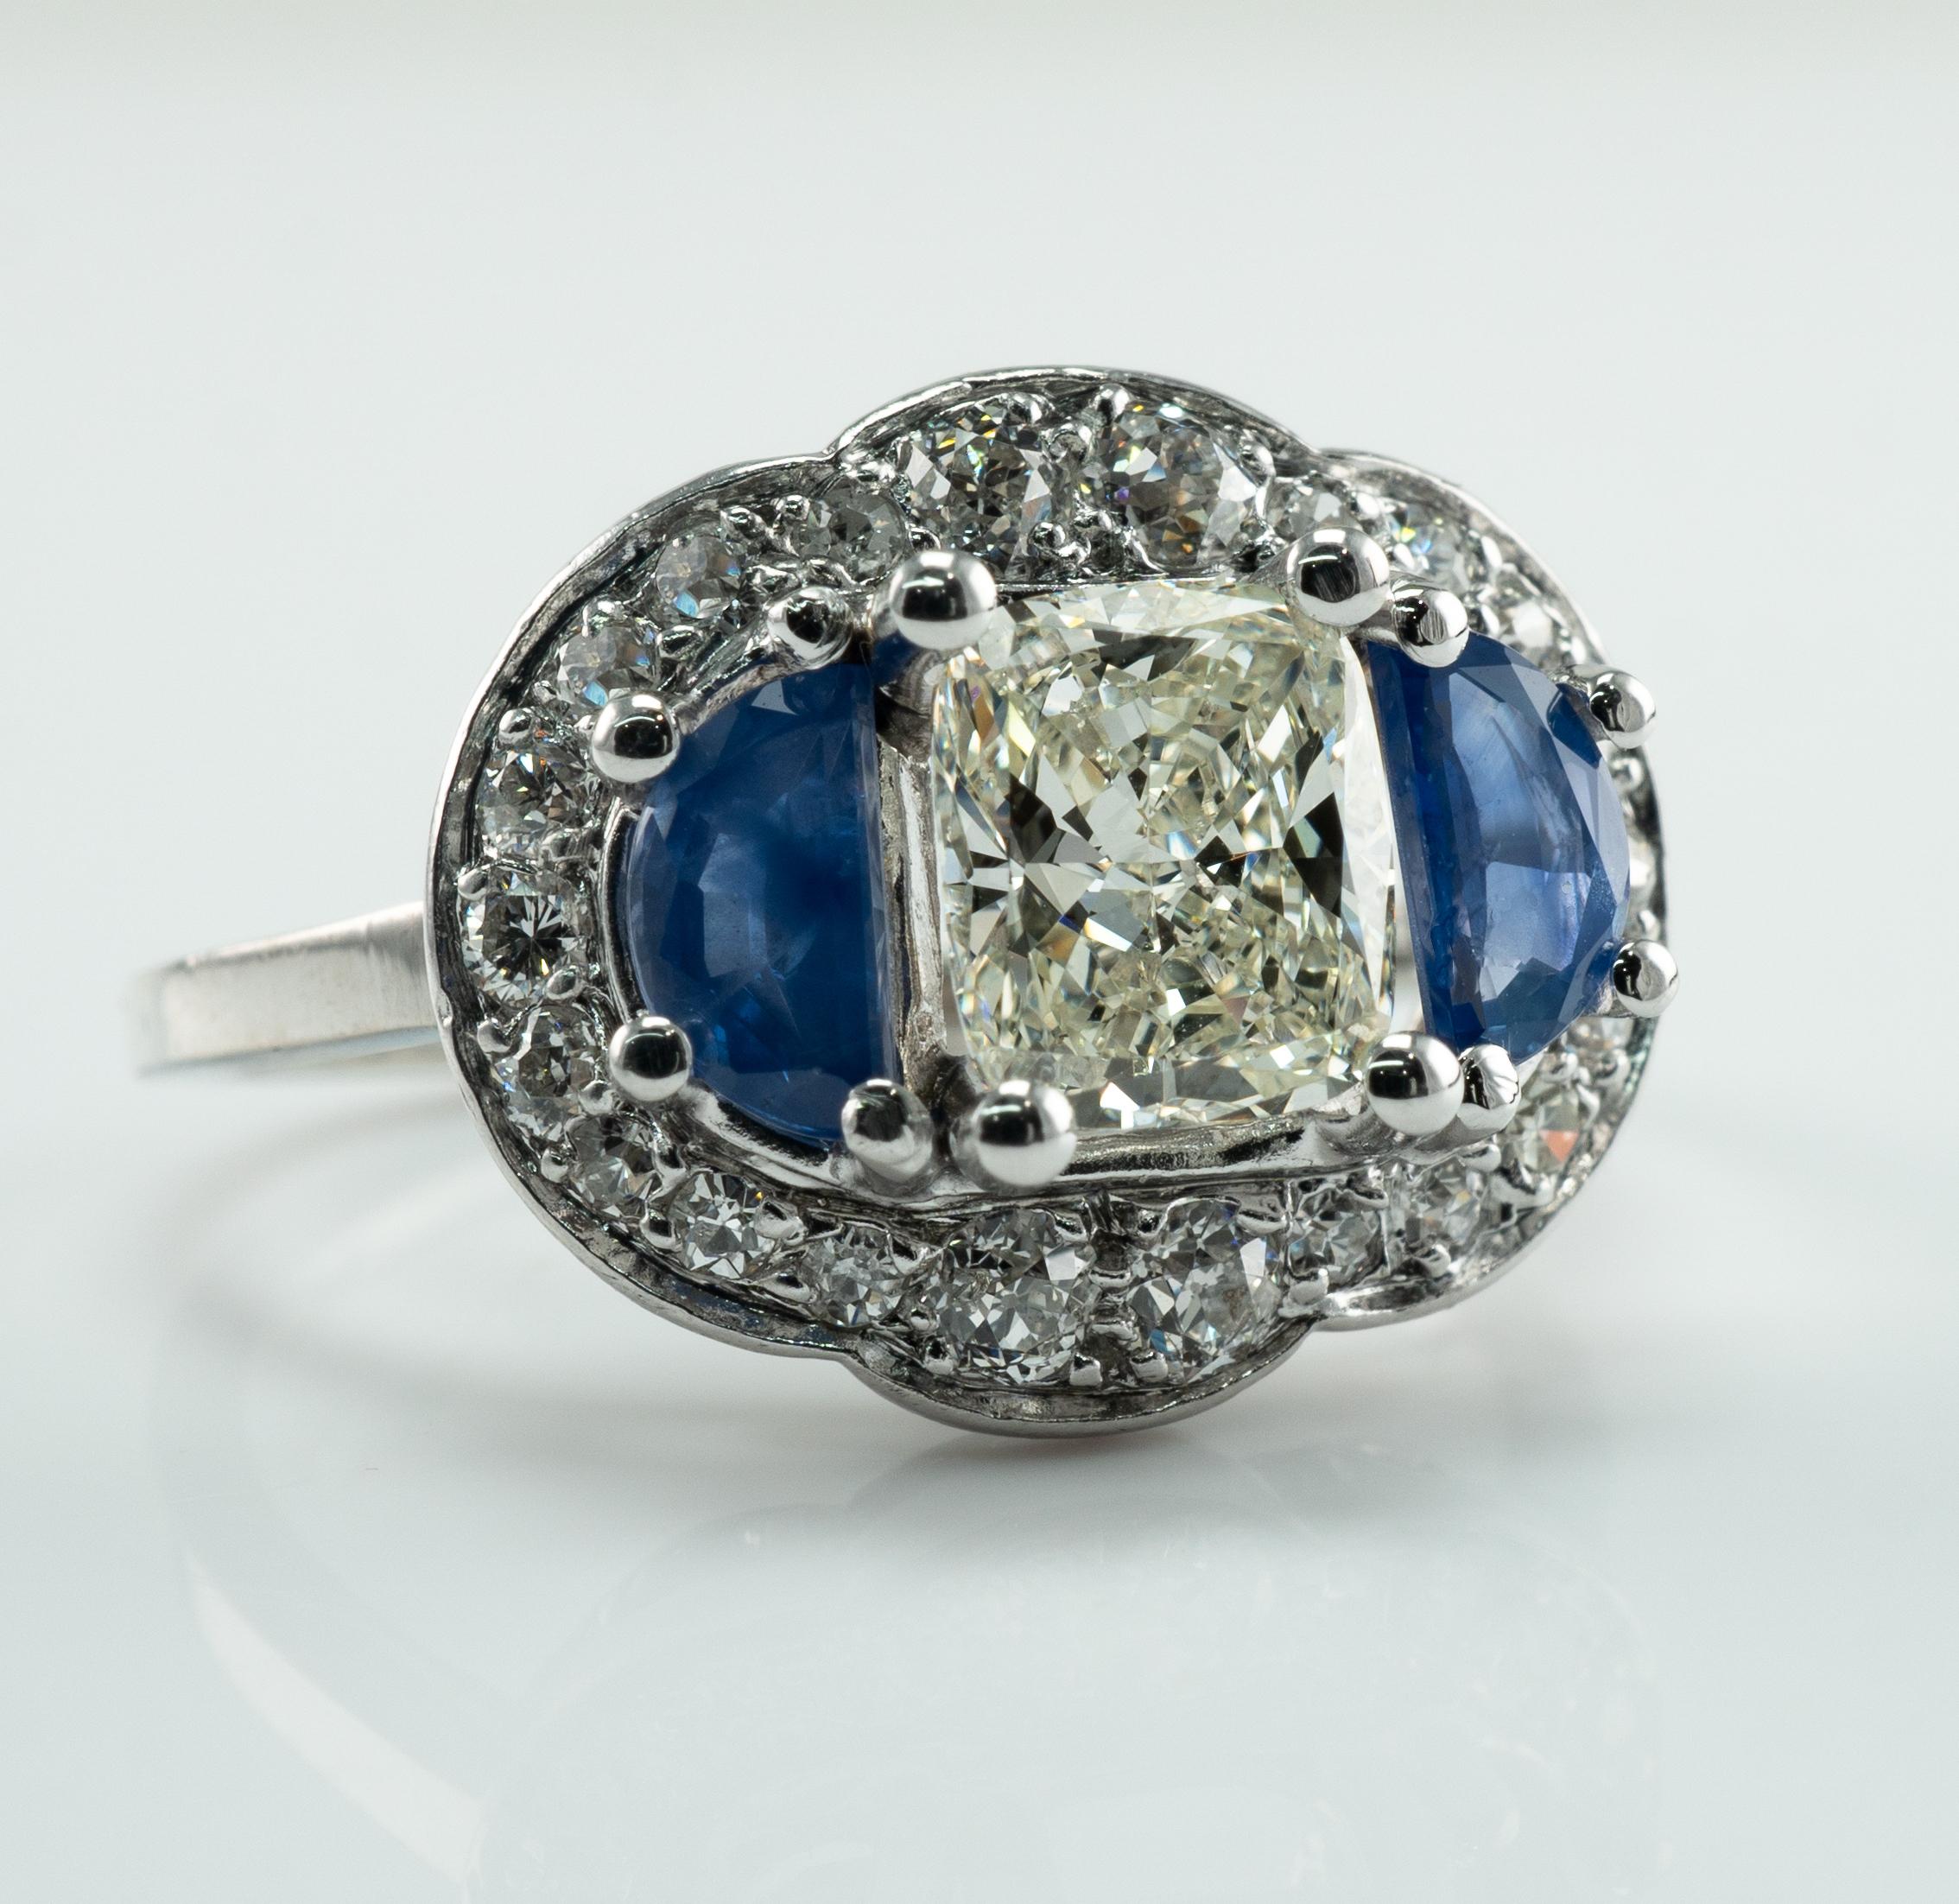 Natural Diamond Half Moon Ceylon Sapphire Ring 14K White Gold Engagement Vintage

This gorgeous estate ring is finely crafted in solid 14K White Gold (carefully tested and guaranteed). The center natural radiant cut Diamond is 1.17 carat. This is a